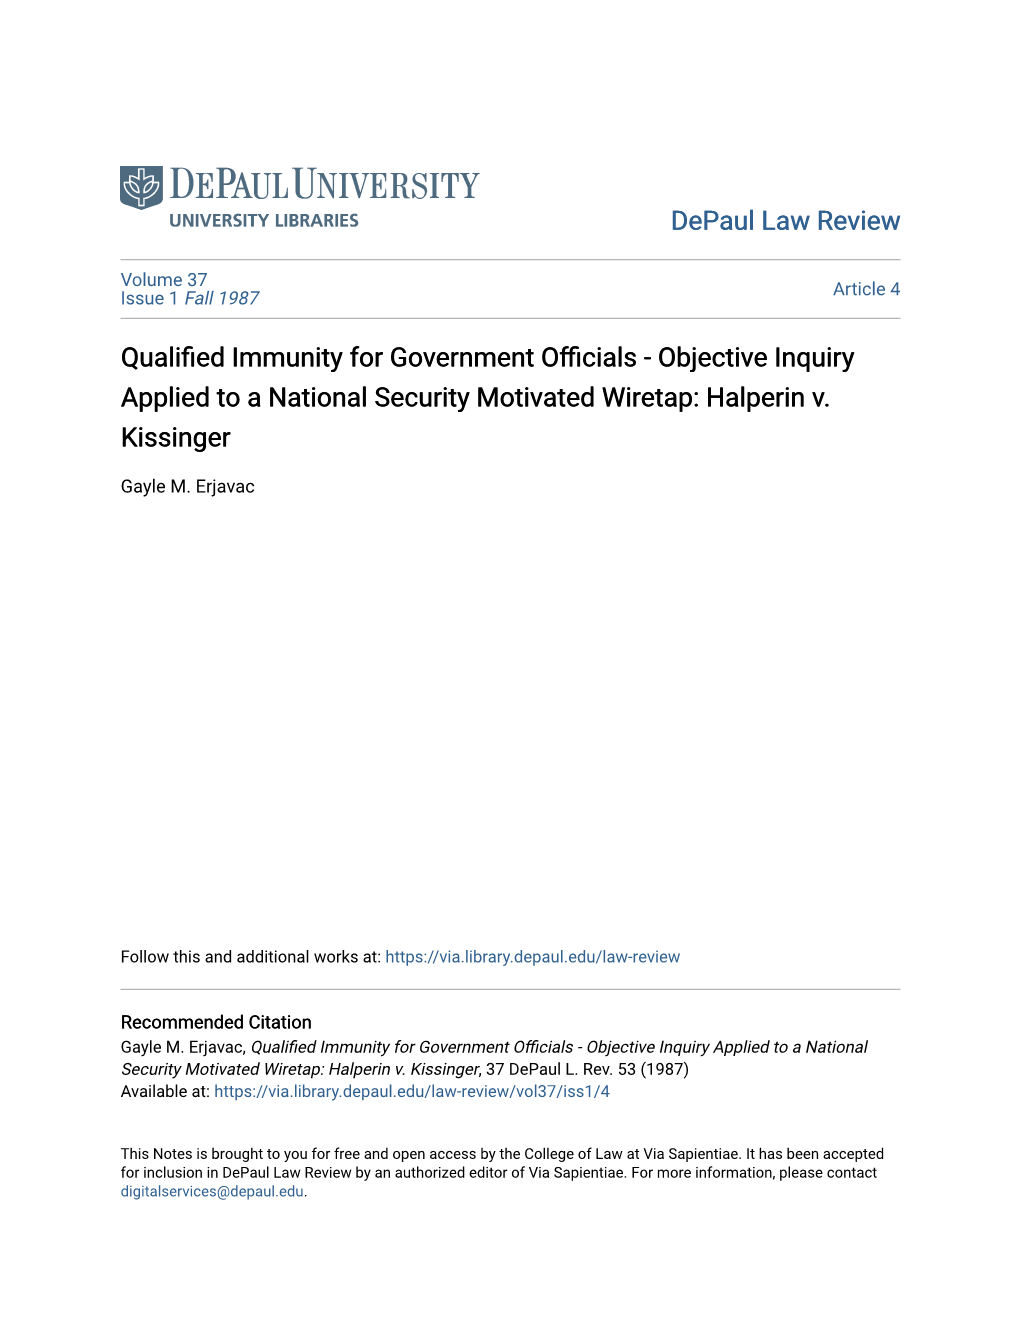 Qualified Immunity for Government Officials - Objective Inquiry Applied to a National Security Motivated Wiretap: Halperin V